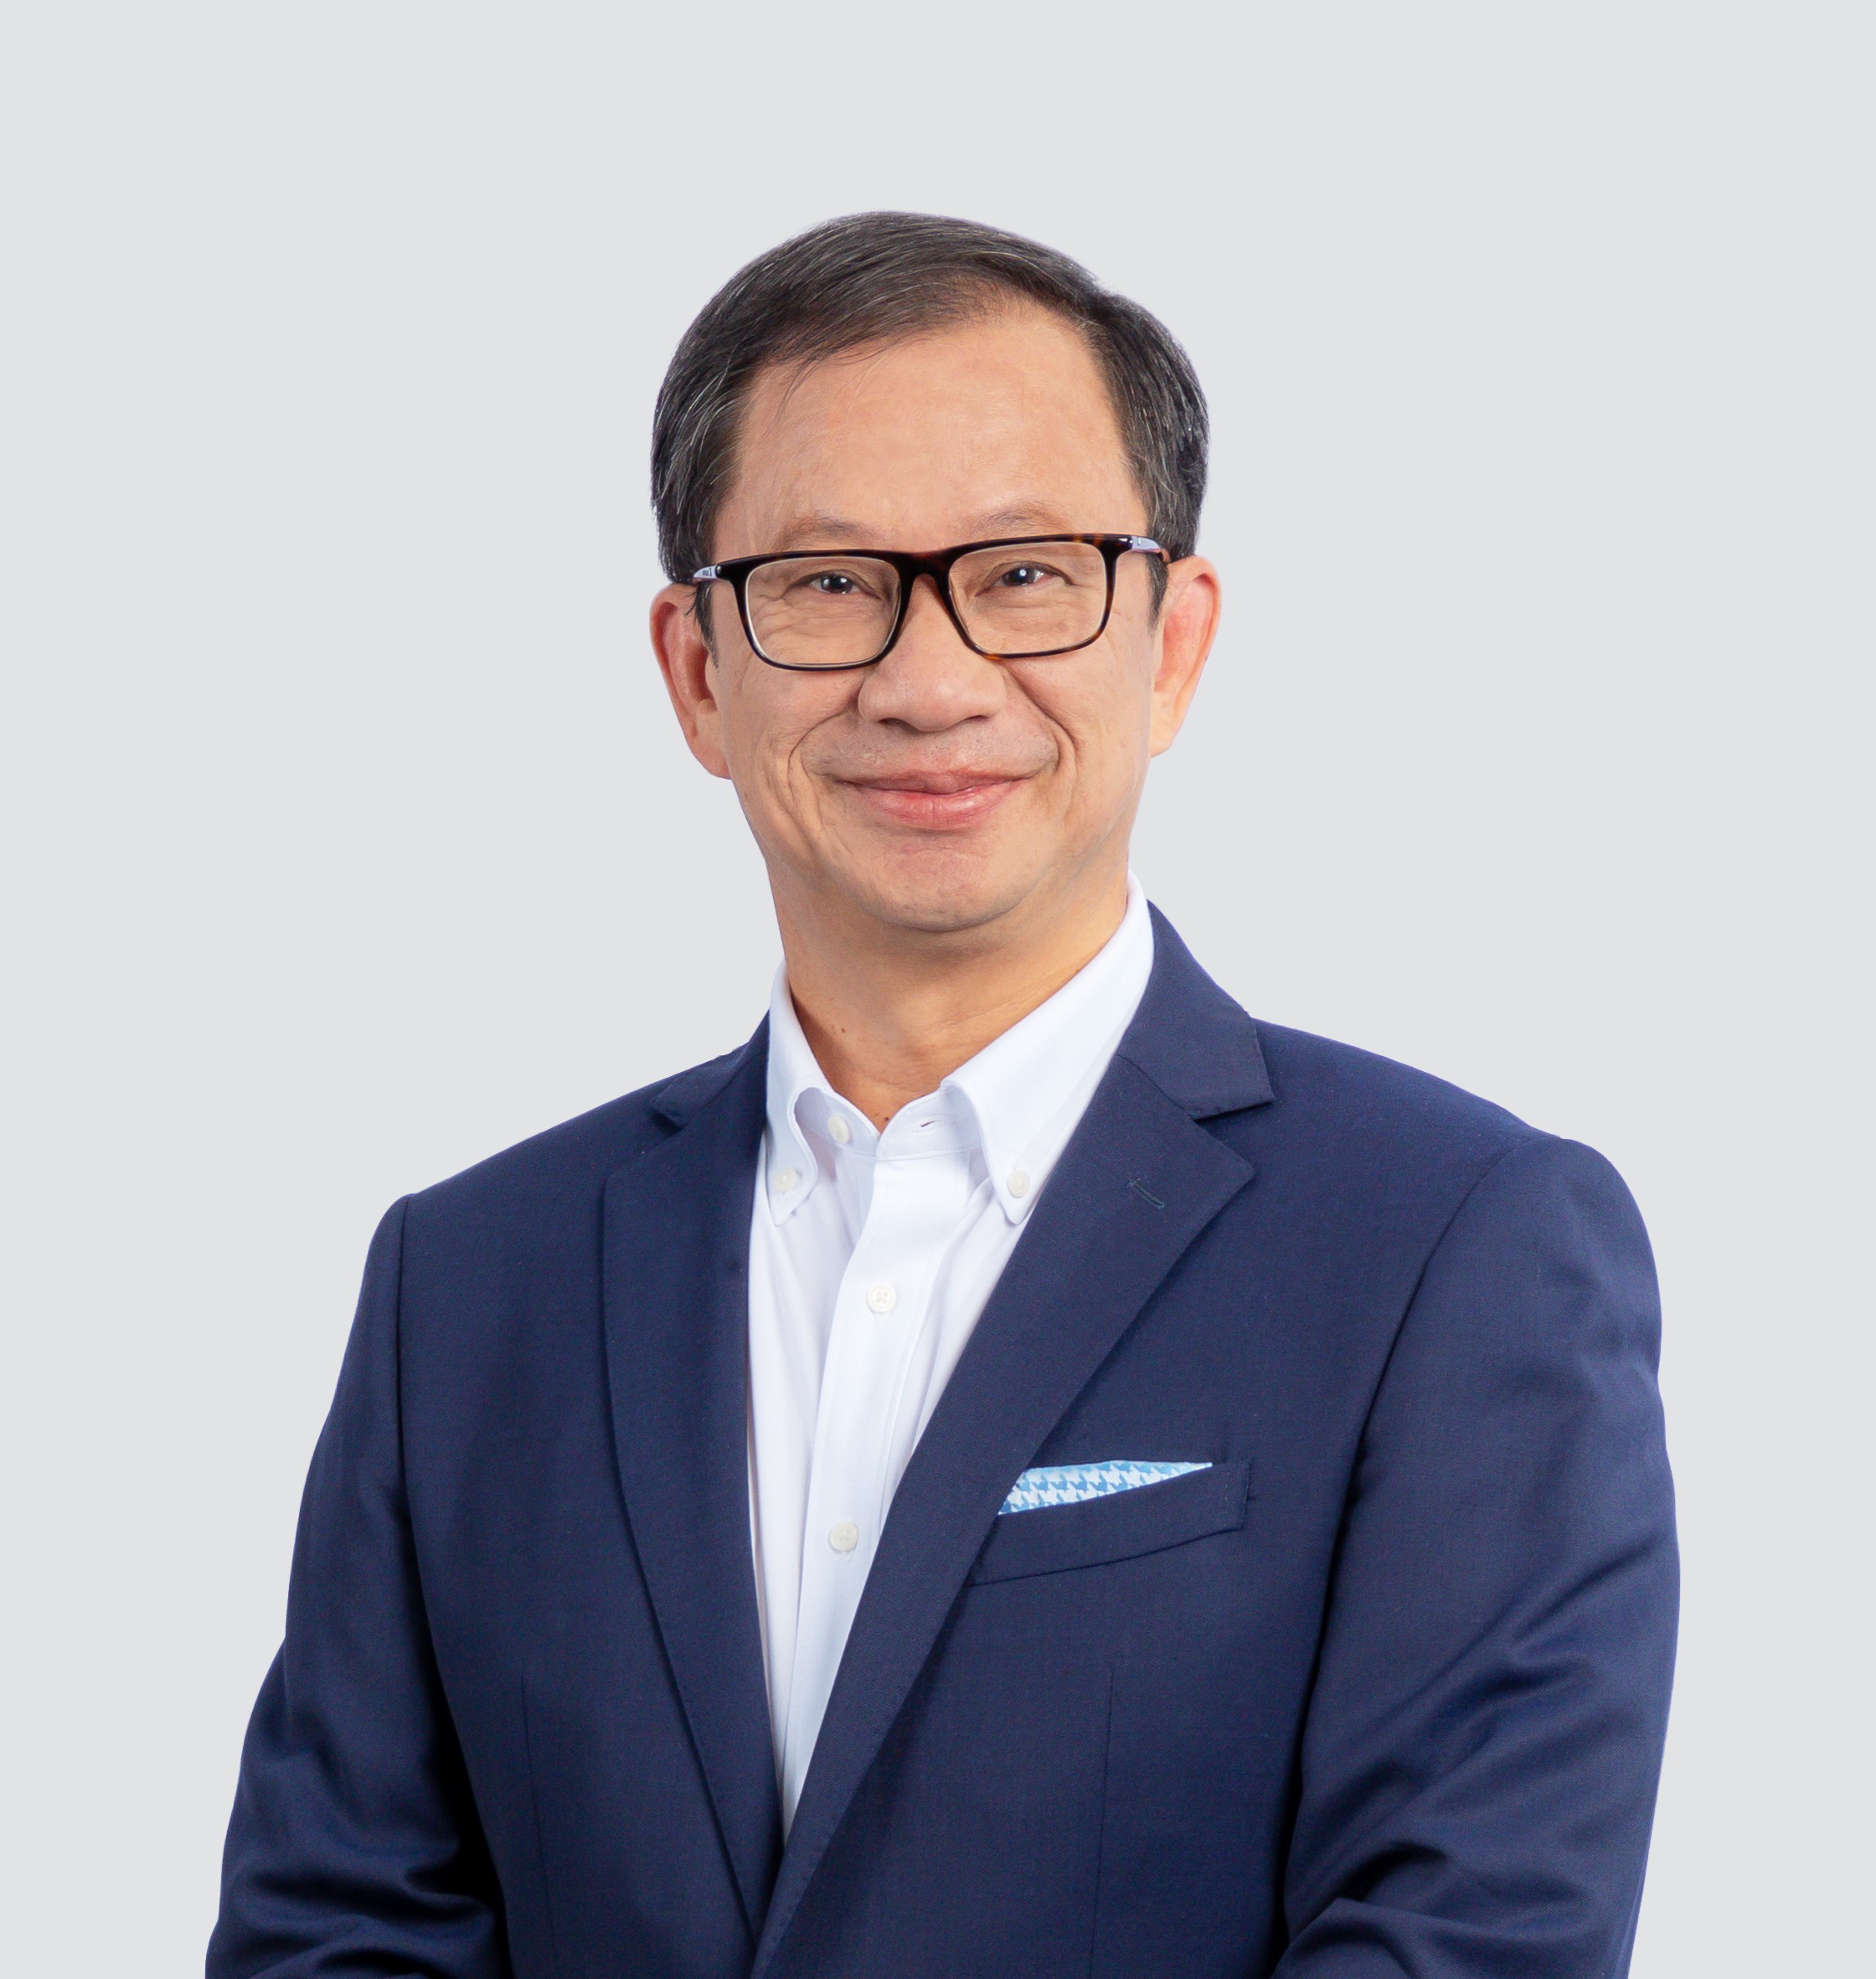 Charles Ong, new CEO of Allianz Life Insurance Malaysia Berhad